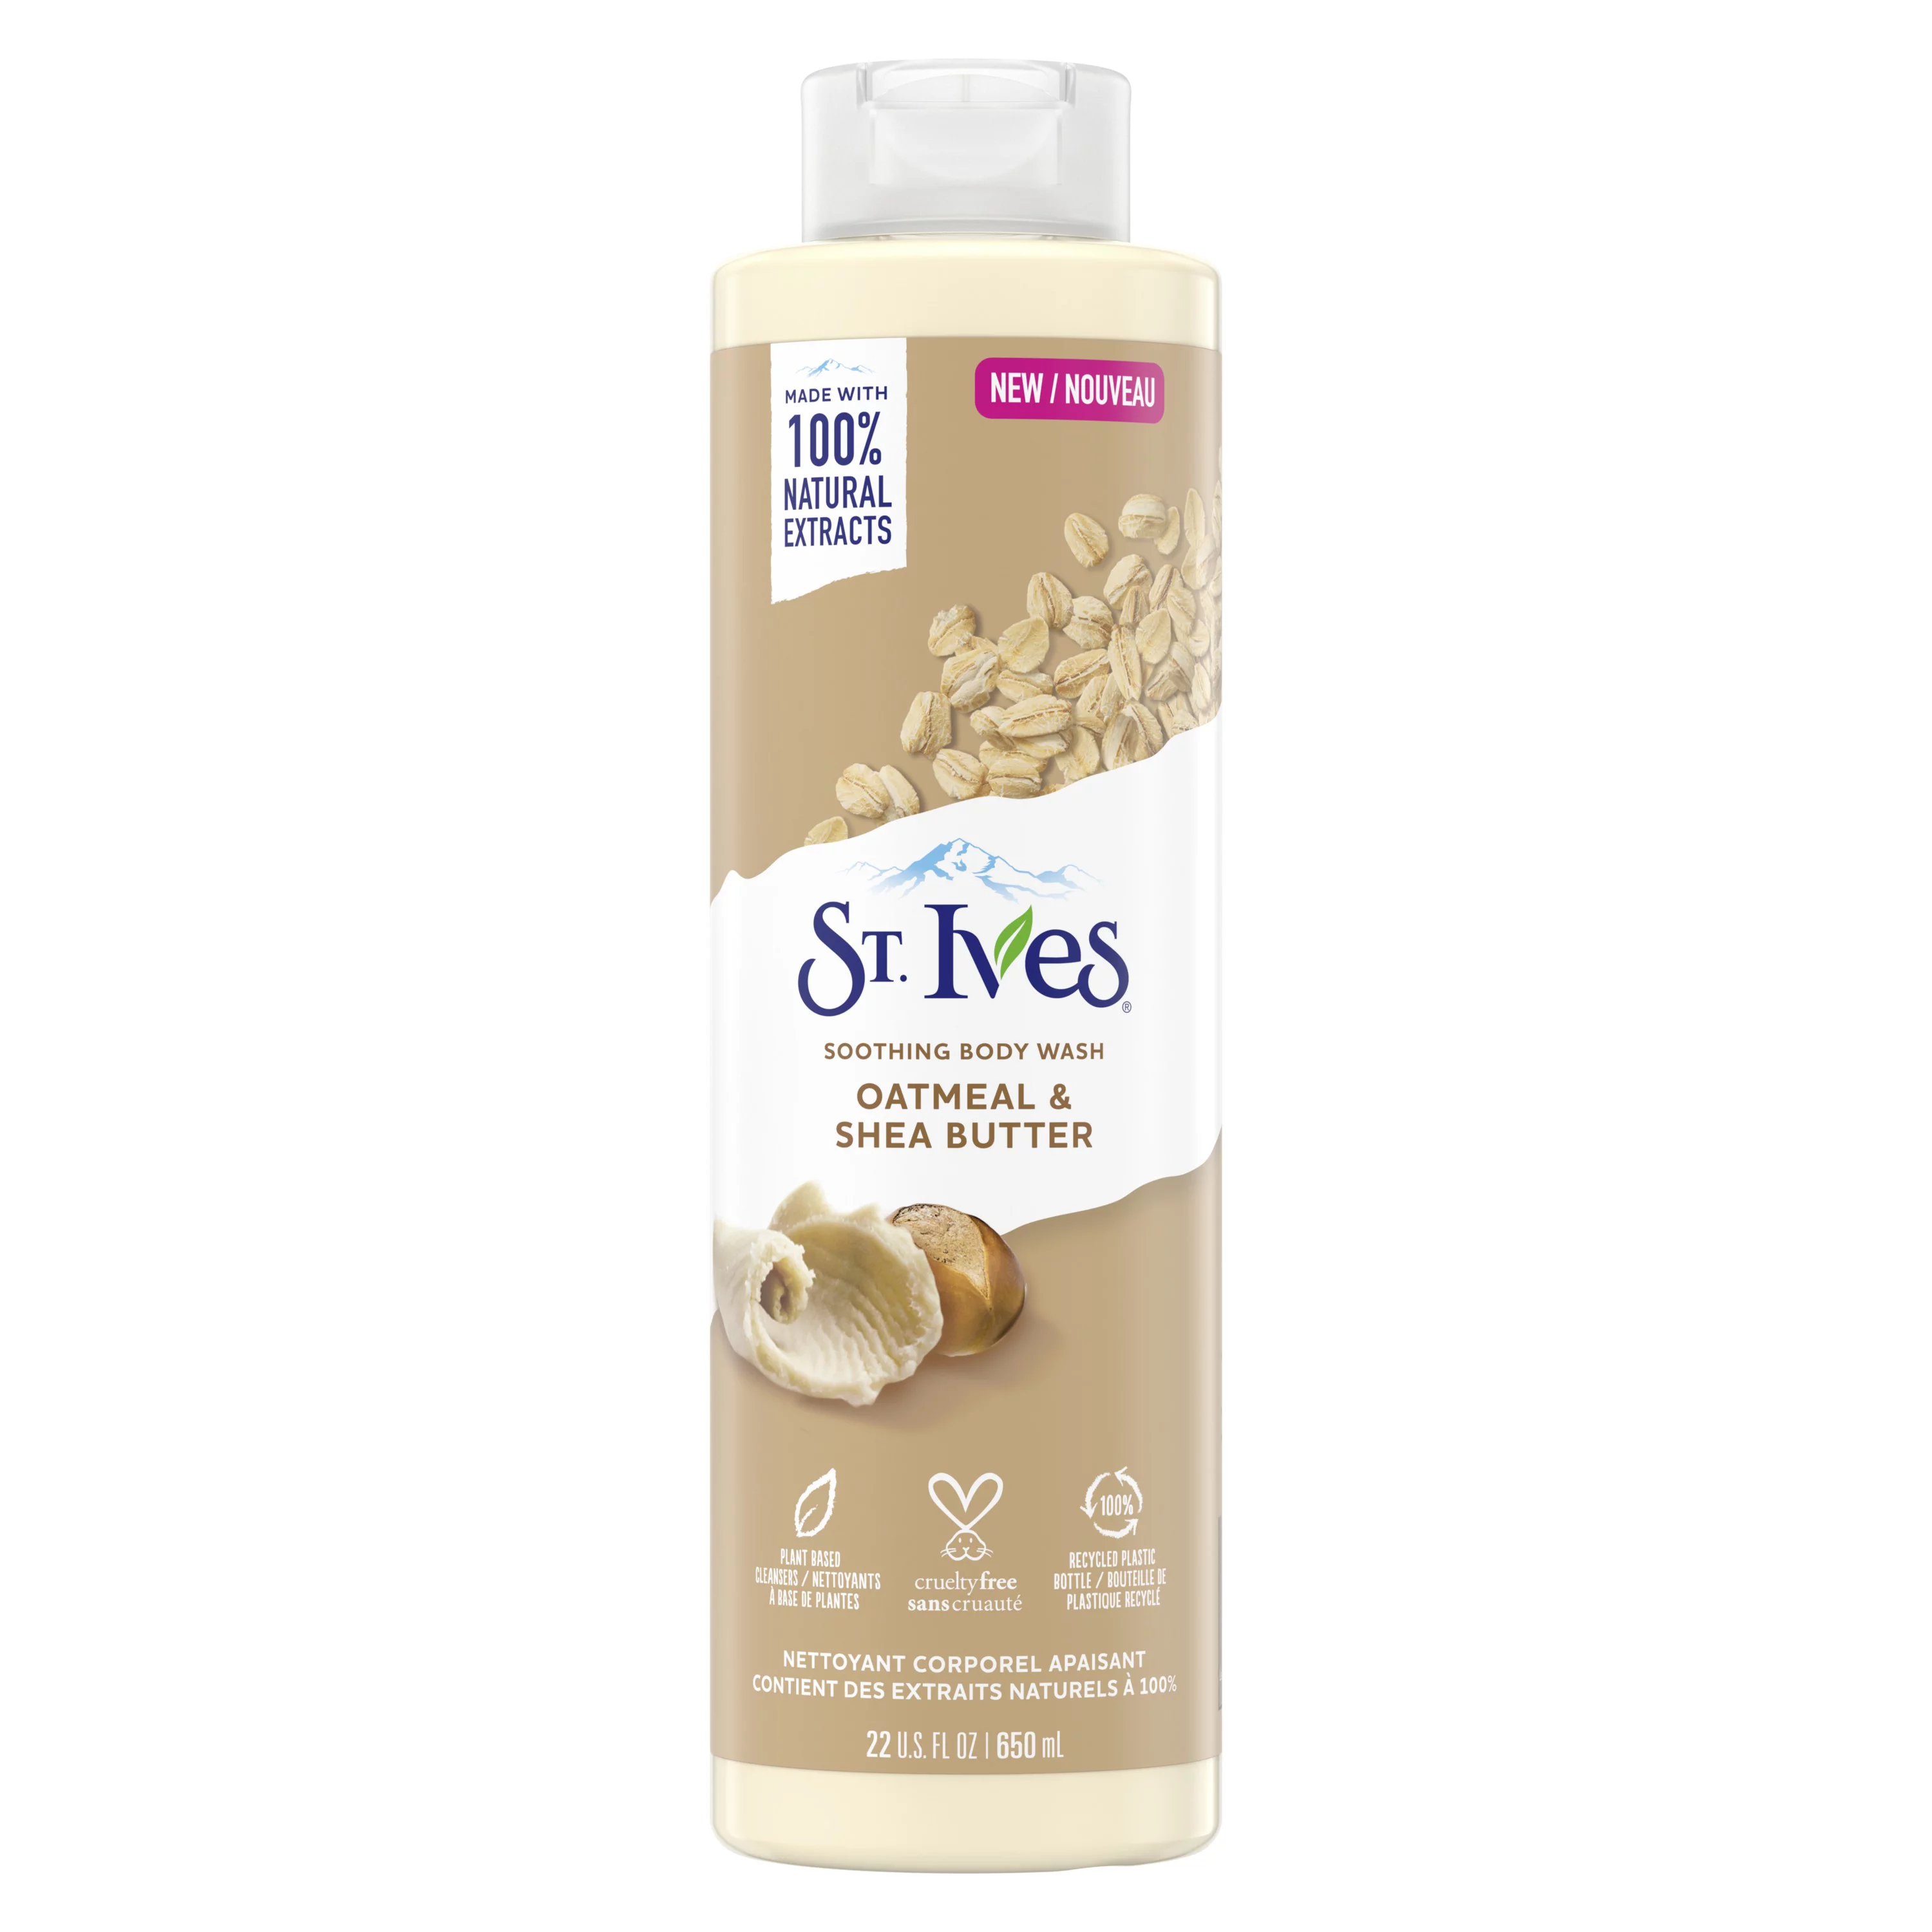 St. Ives Oatmeal and Shea Butter Soothing Liquid Body Wash 22 oz